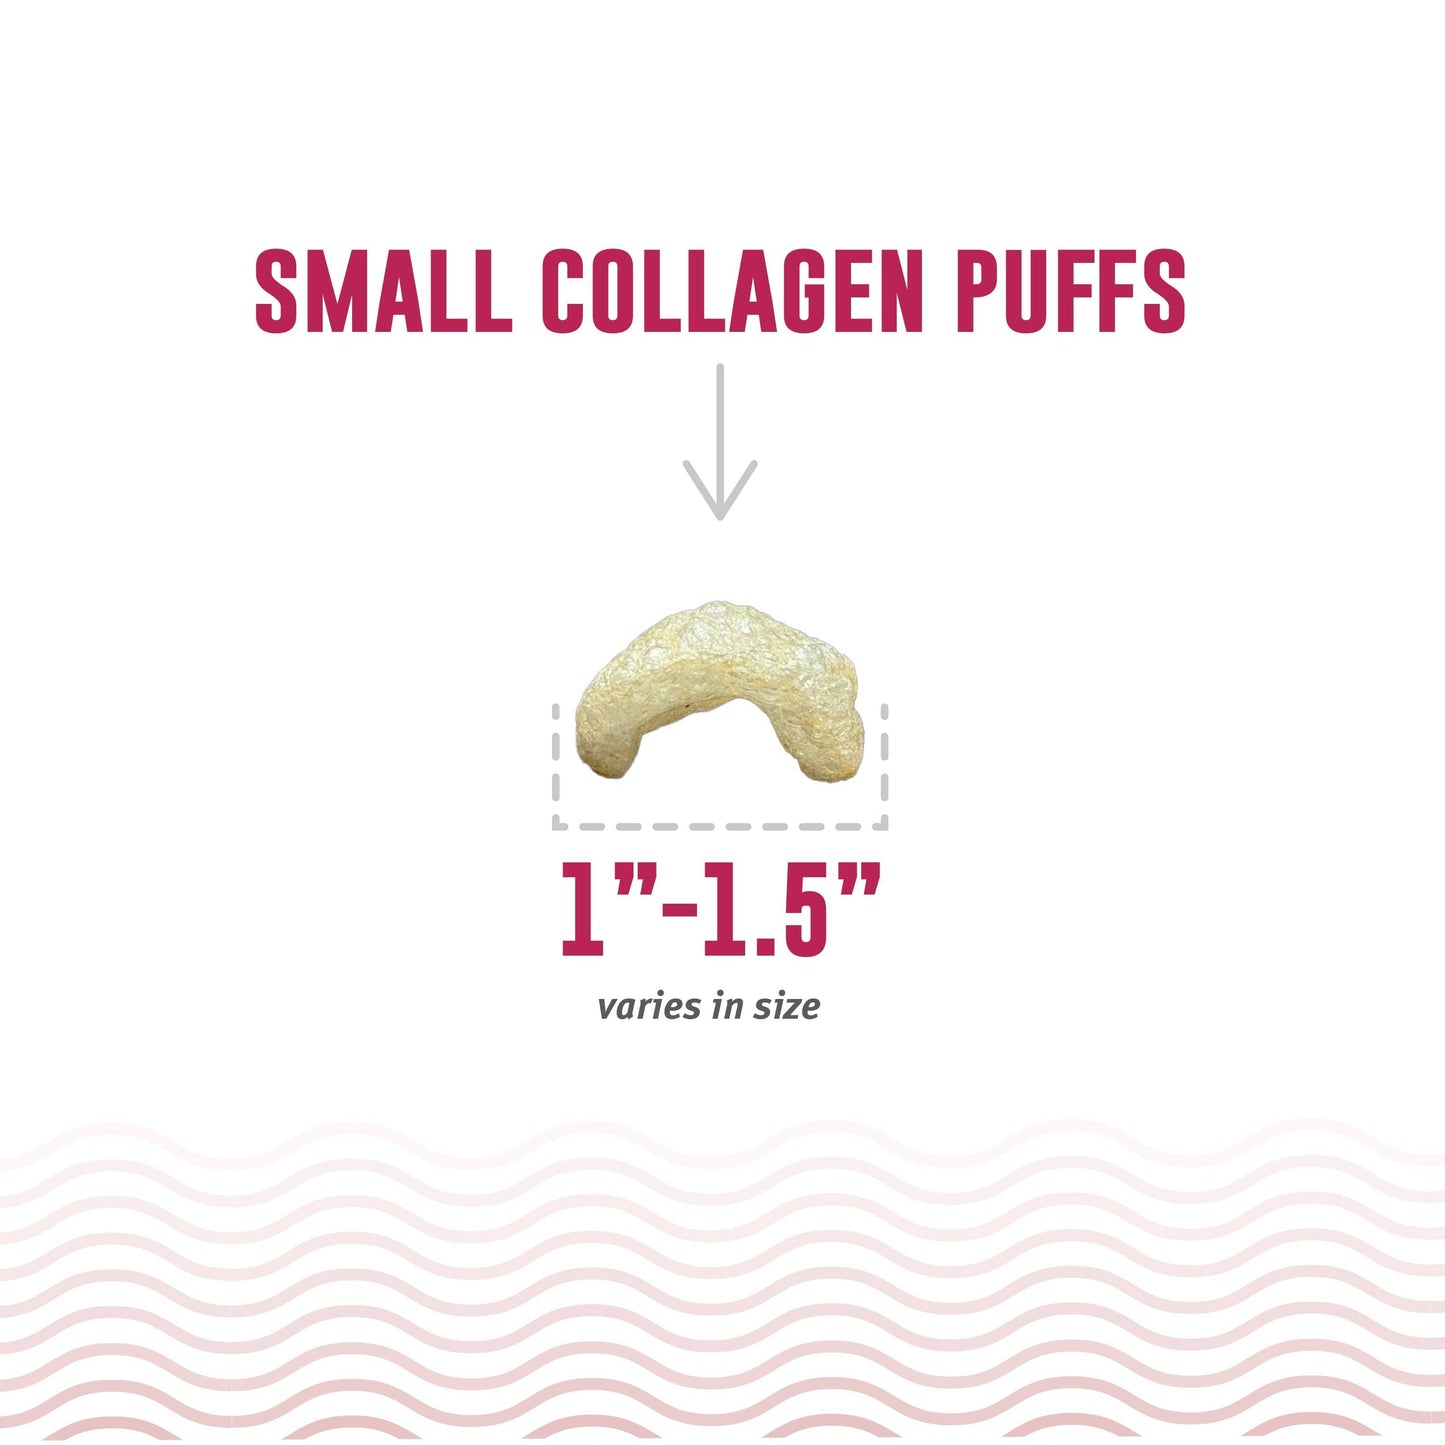 Icelandic+ Beef Collagen Puffs with Kelp Small Dogs 1.3-oz